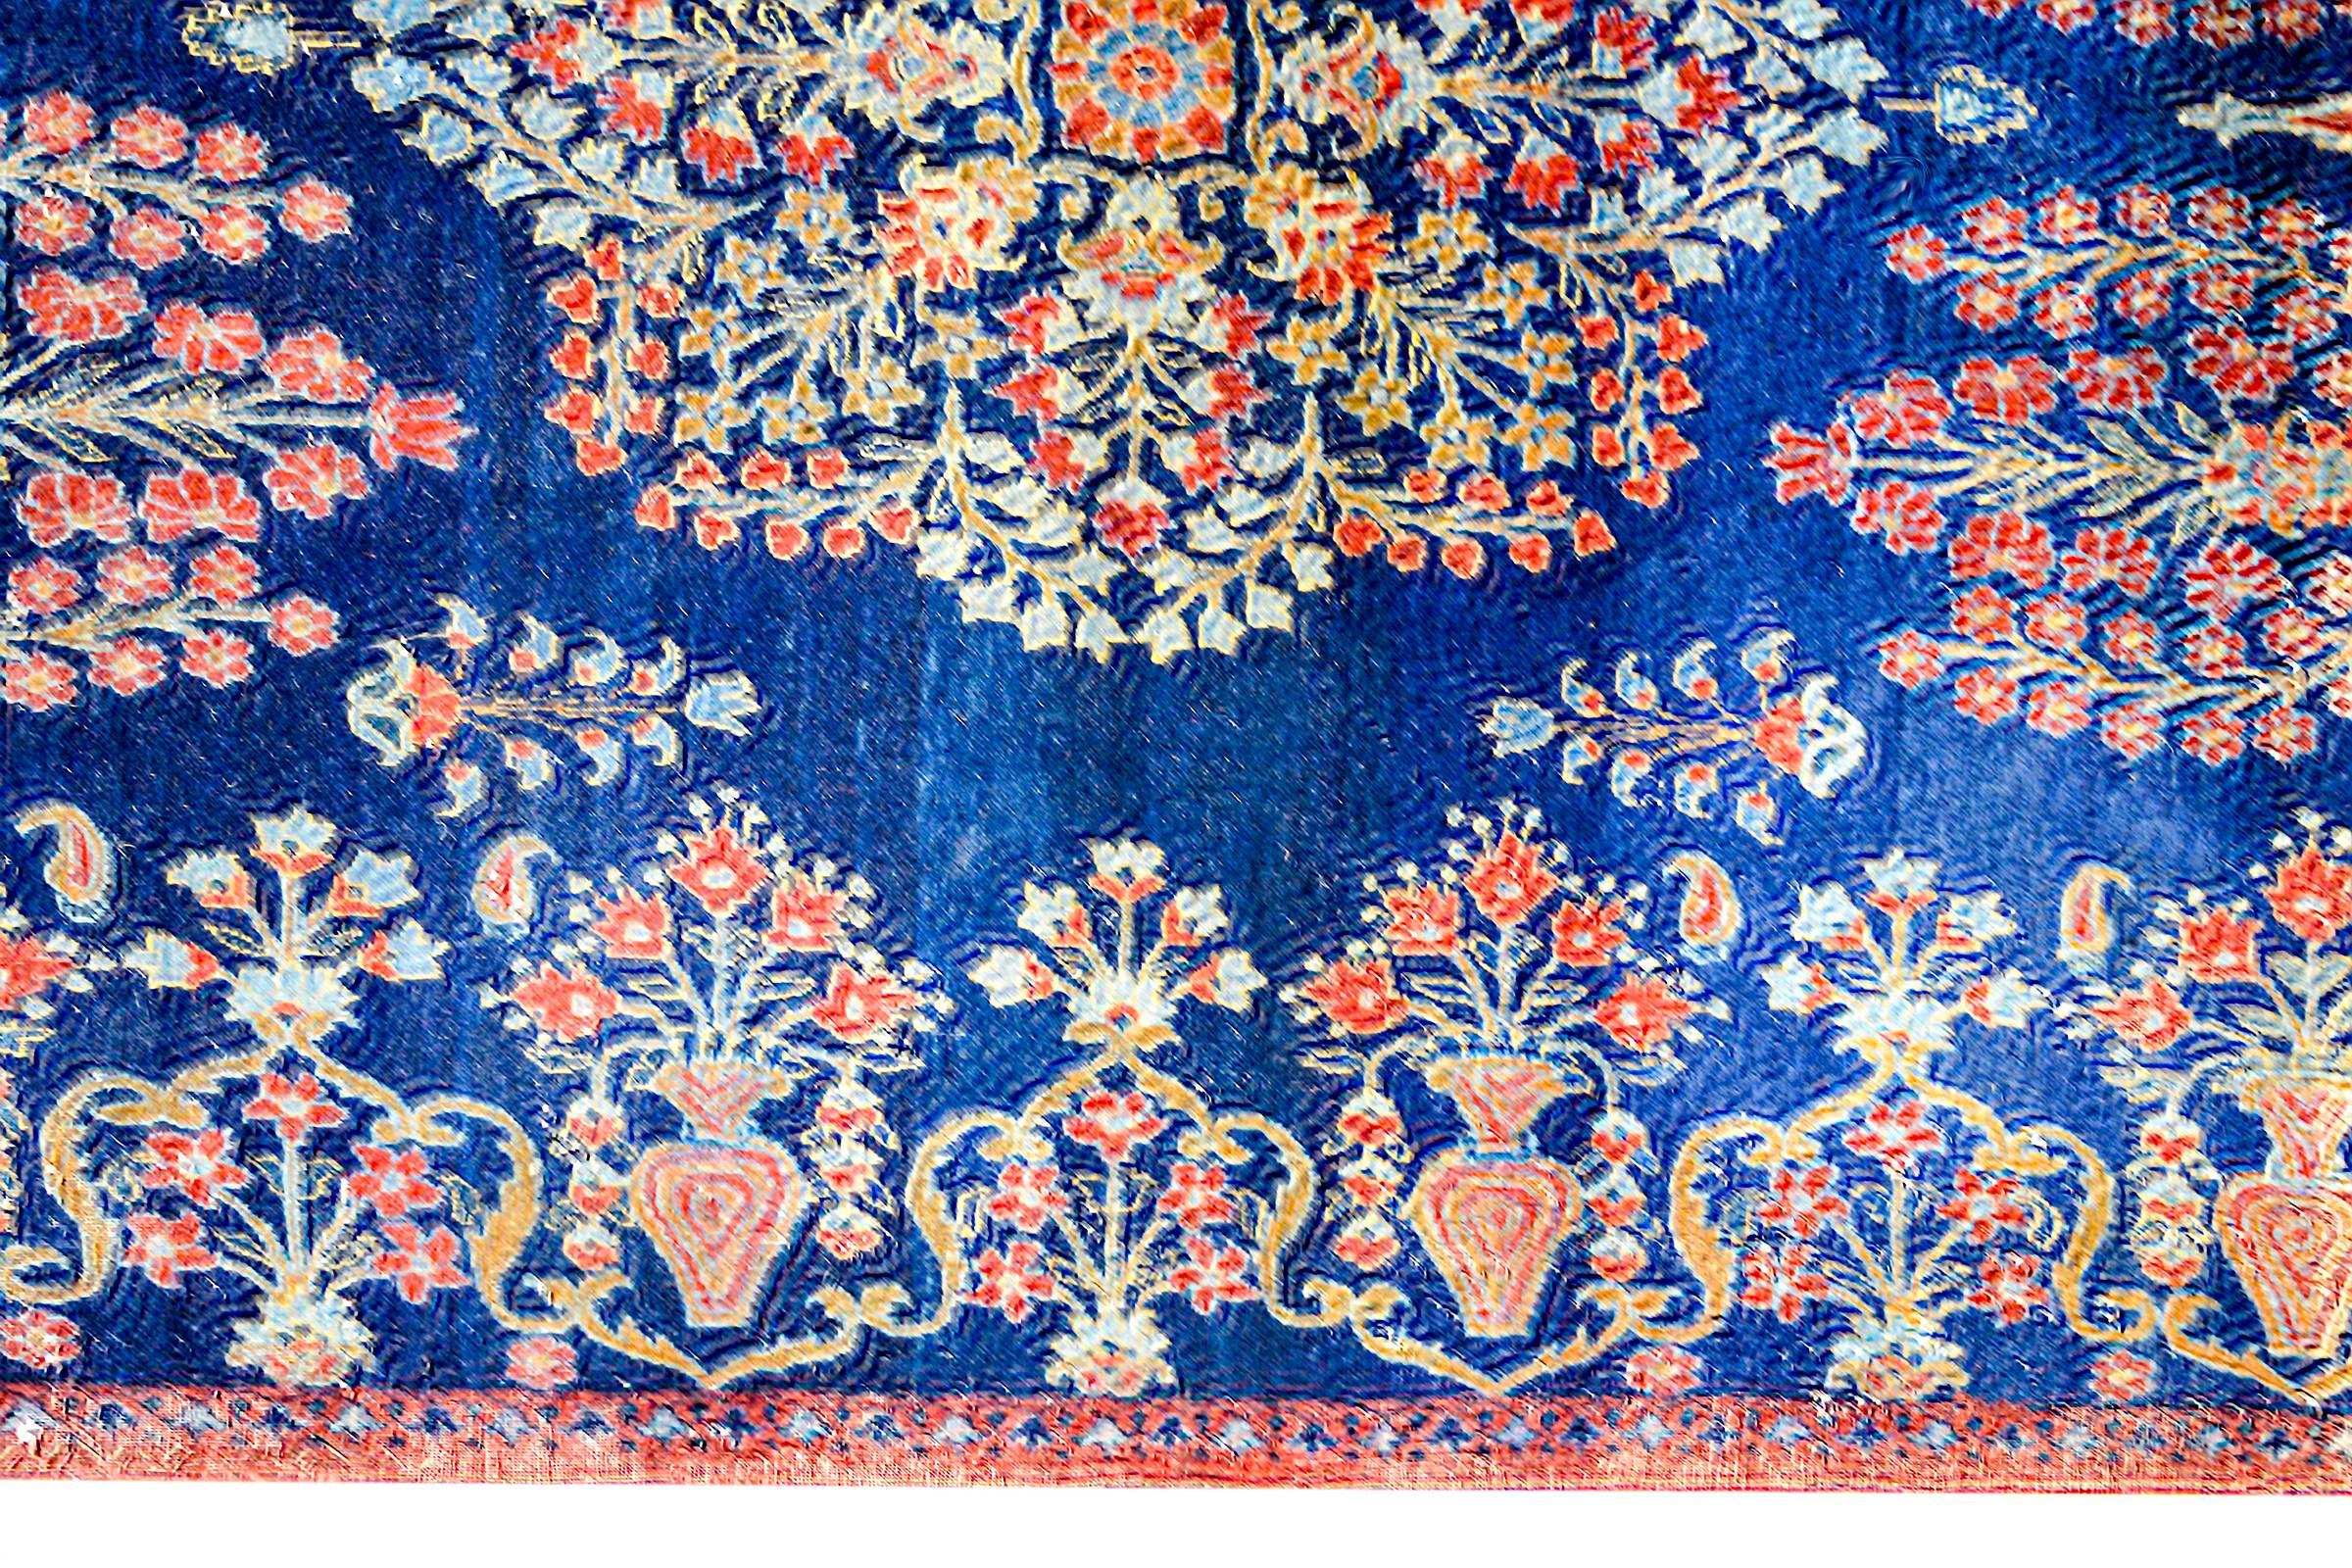 A wonderful early 20th century Persian Kirman rug with a densely woven mirrored floral and leaf pattern woven in indigo, pink, gold and crimson vegetable dyed wool. The border is interesting as it is included in the overall design of the rug, and